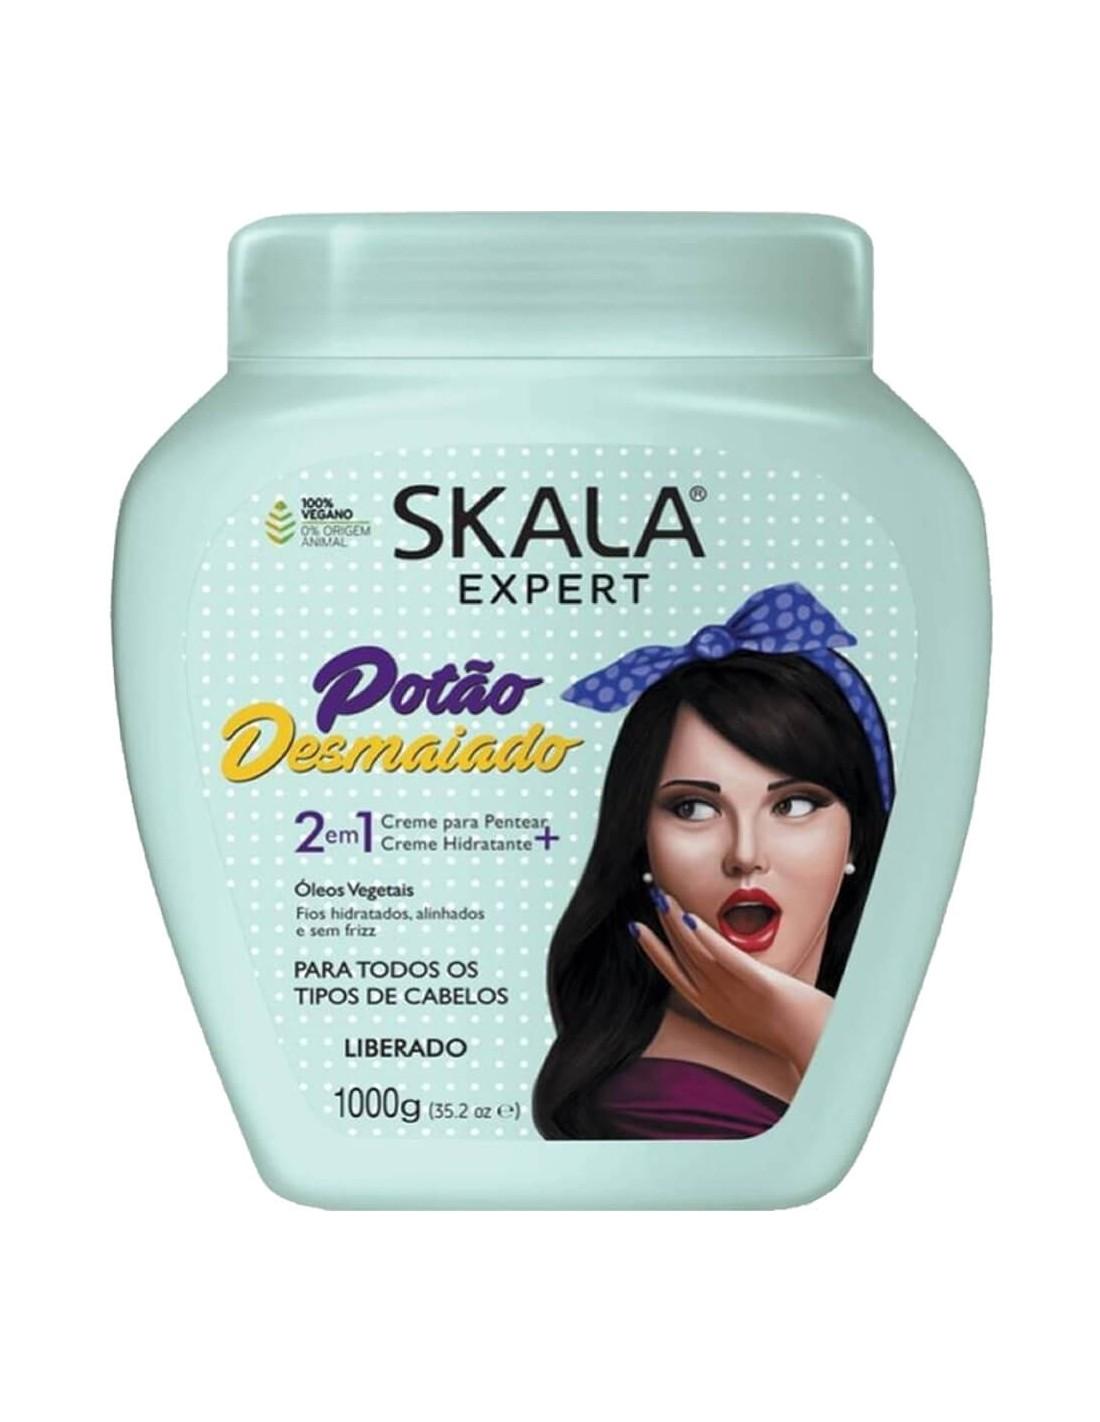 Skala Mask is most durable for all types of cheveux 1 kg - Skala Portugal